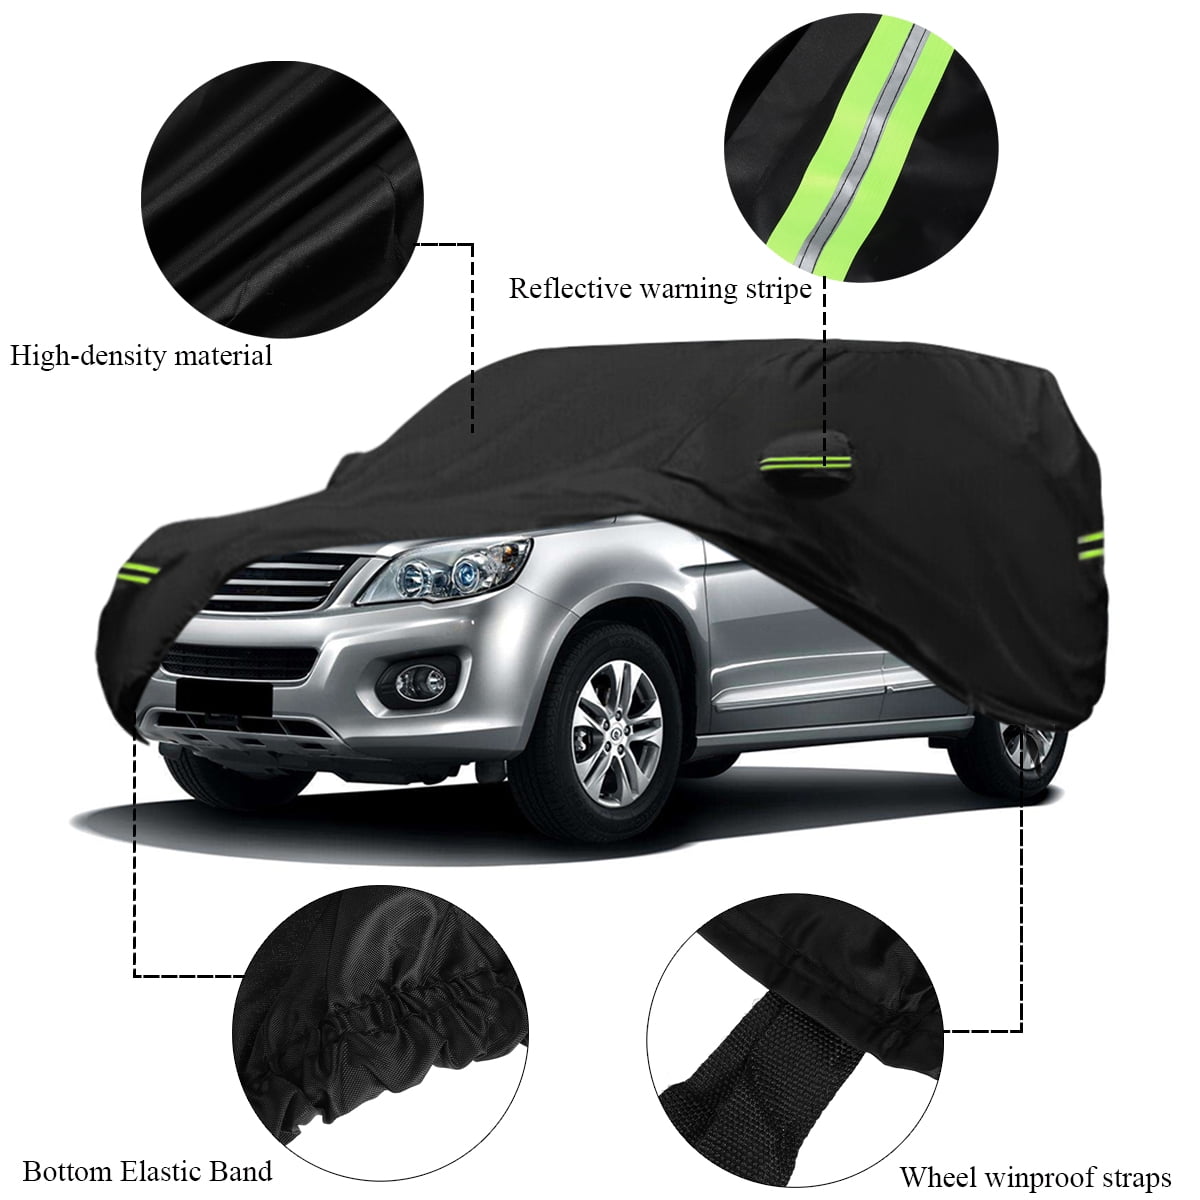 Full SUV Car Cover Waterproof Outdoor Rain Dust UV Resistant Protection S/M/L